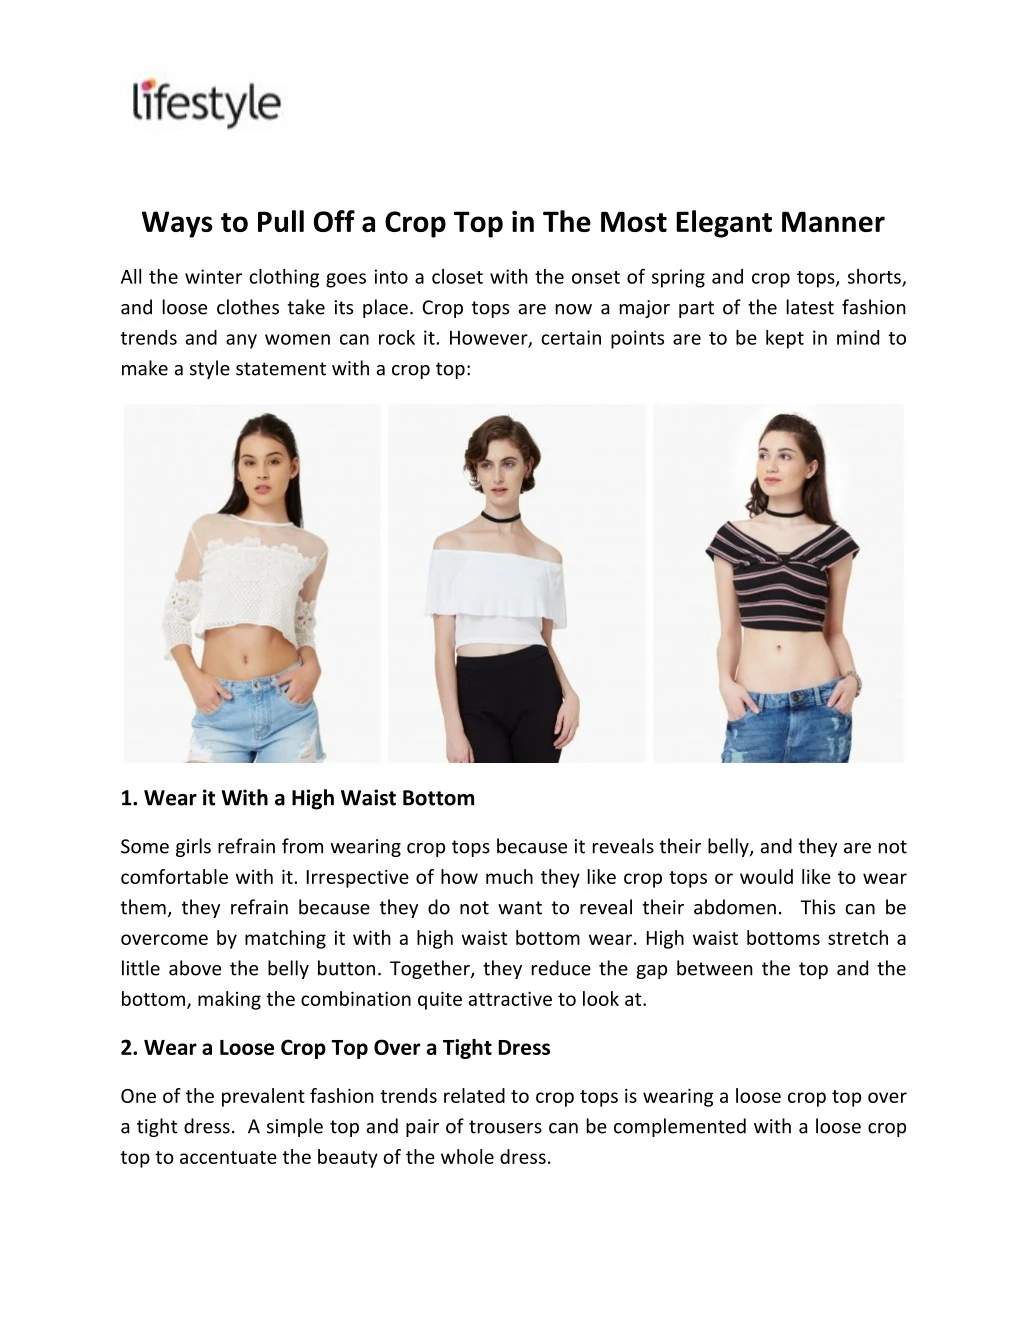 ways to pull off a crop top in the most elegant